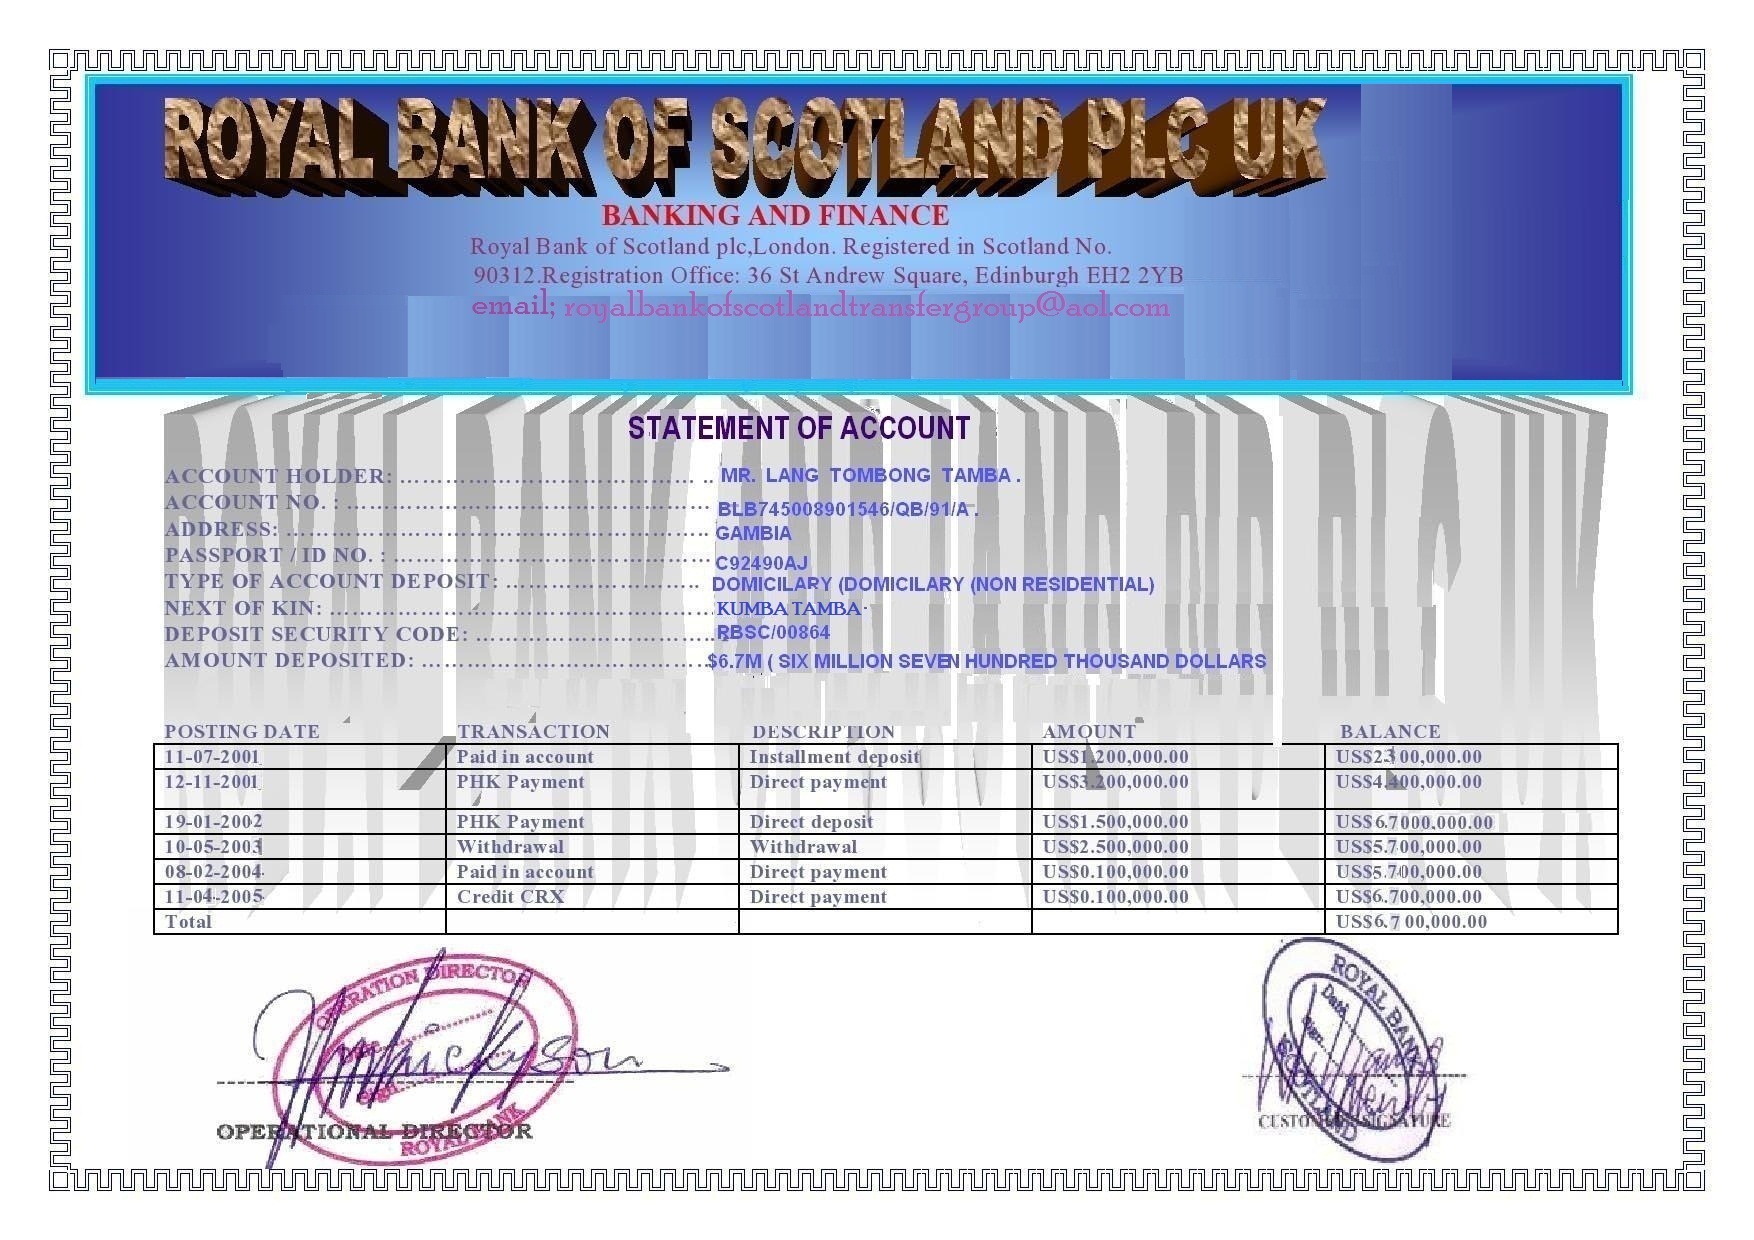 THE_DEPOSIT_CERTIFICATE_OF_THE_ACCOUNT.jpg